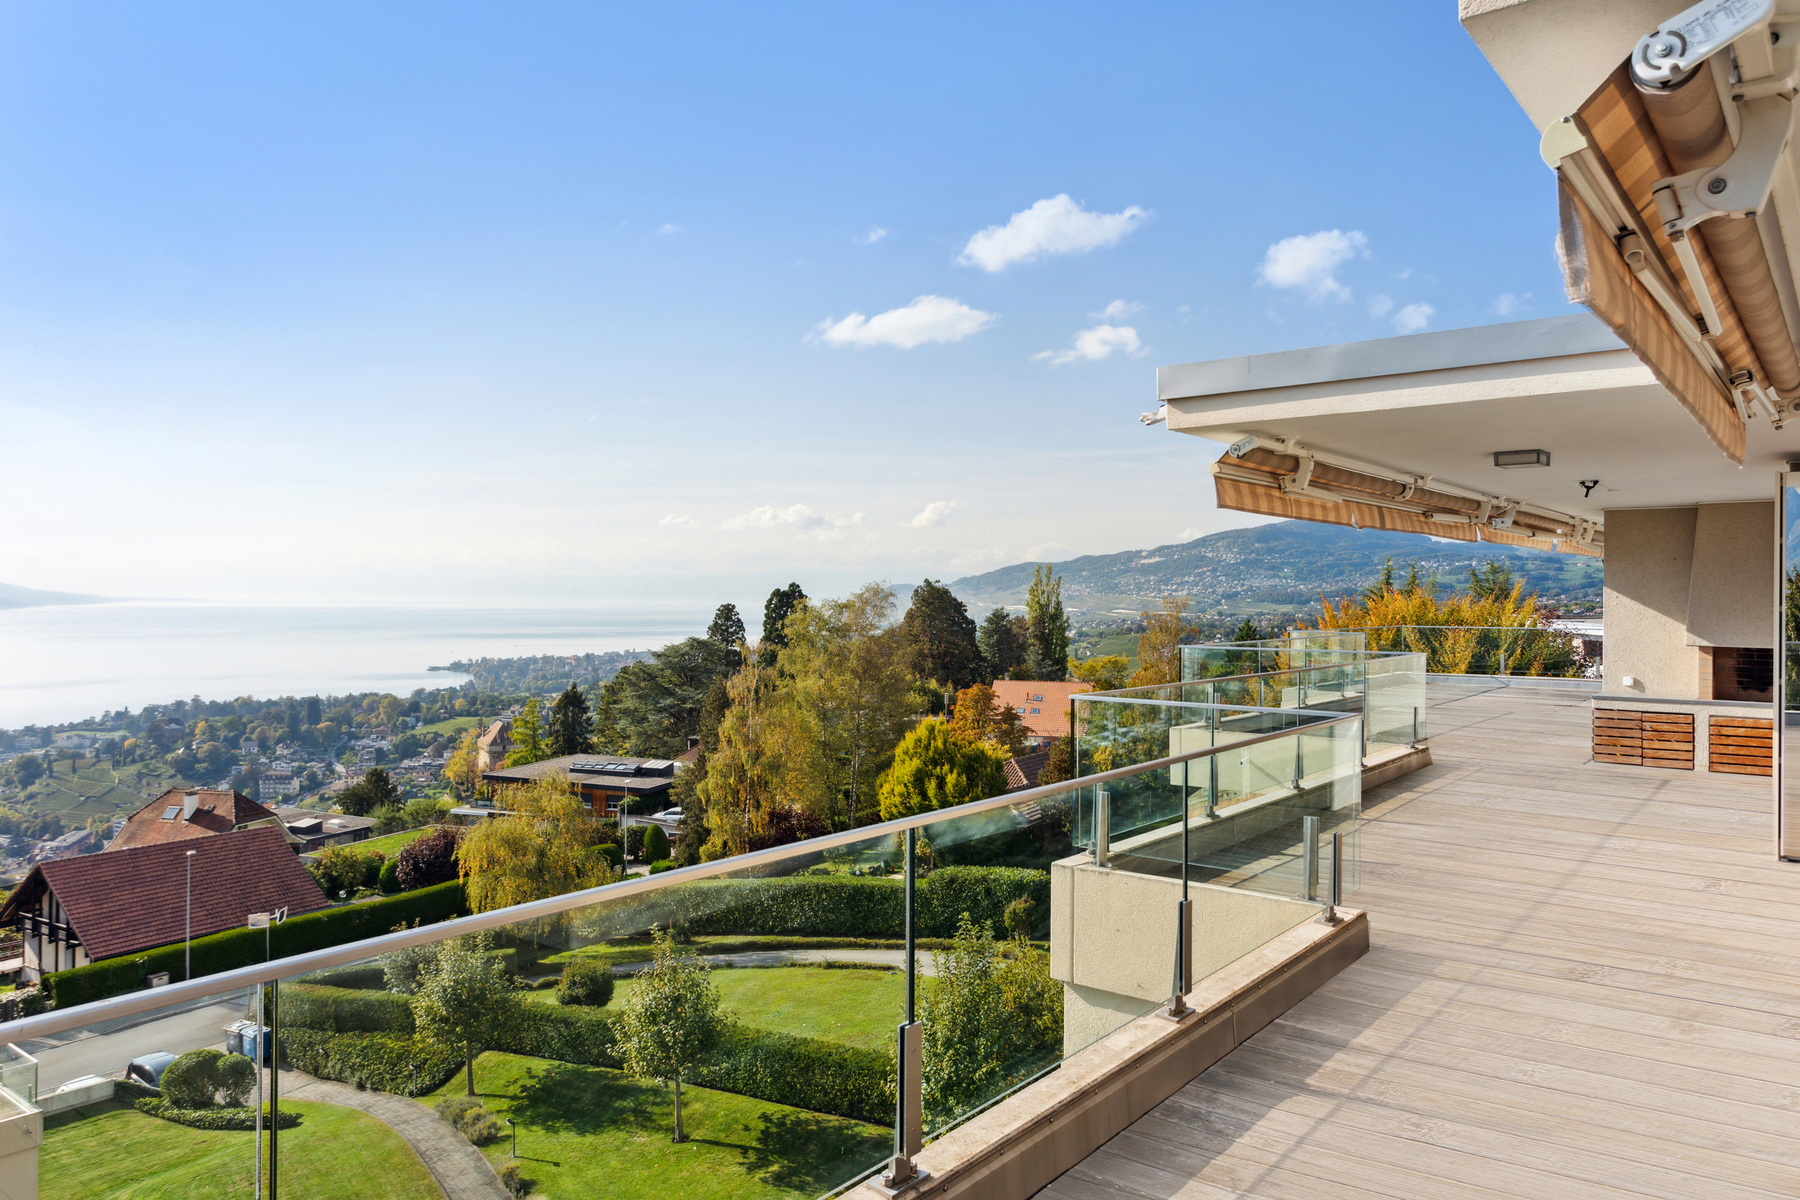 Exceptional penthouse with 182 m2 terrace and unobstructed view